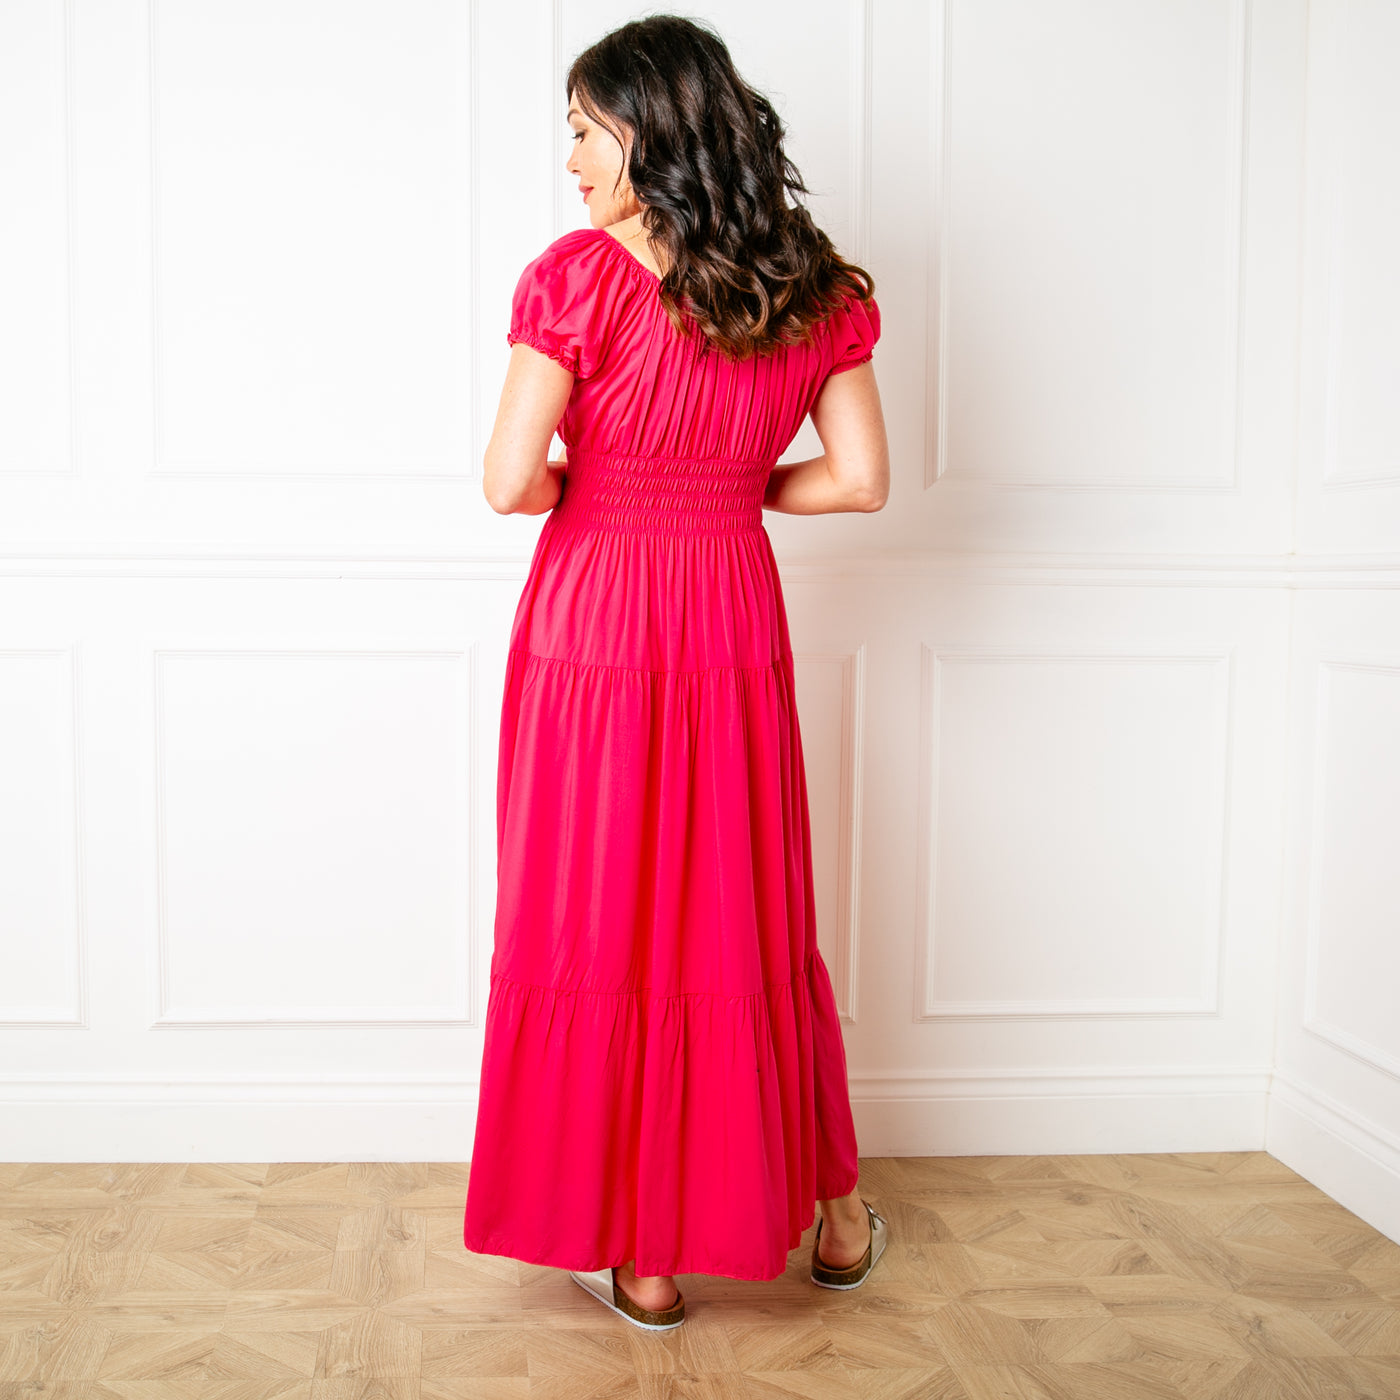 The fuchsia pink Button Front Maxi Dress with a tiered maxi skirt, perfect for your summer holiday